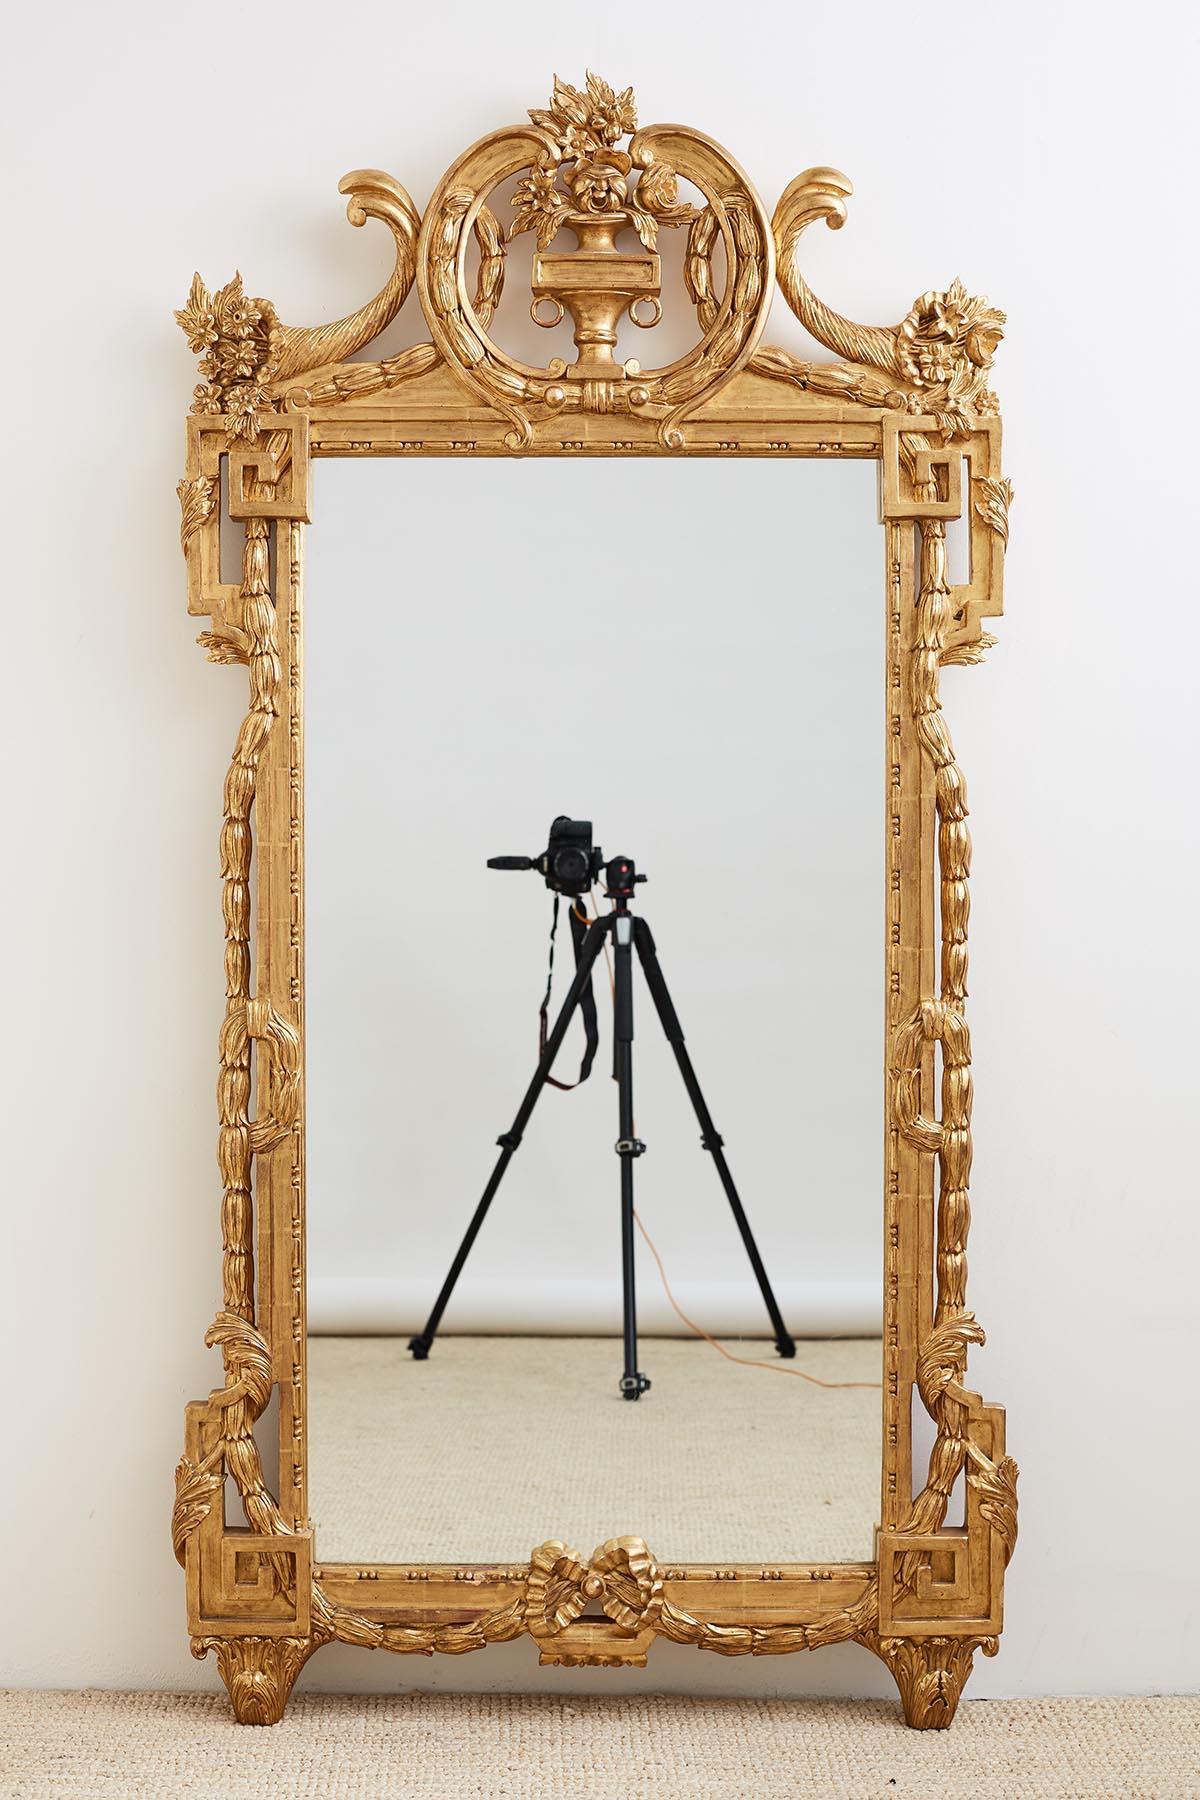 Grand pair of French Louis XVI style giltwood pier mirrors or mantle mirrors made in the neoclassical taste. The rectangular mirrors are decorated with large Greek key designs on each corner and draped by laurel swag ropes with acanthus leaves. The